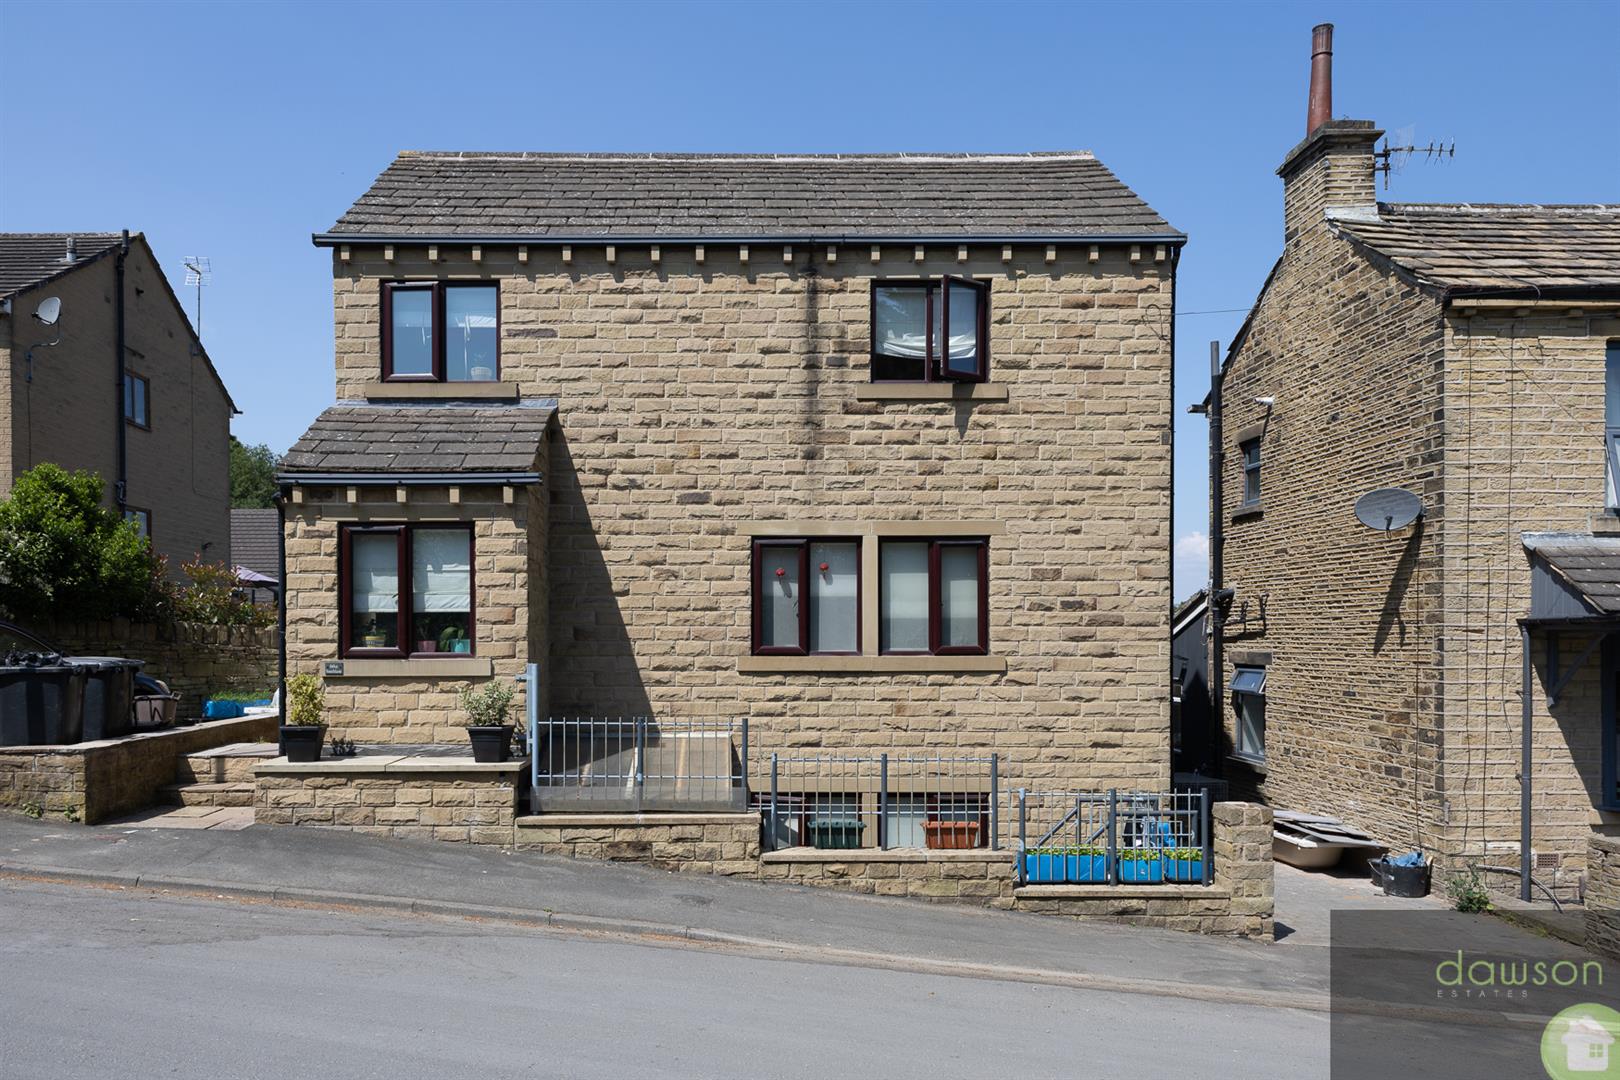 4 bed detached house for sale in South Lane, Elland - Property Image 1